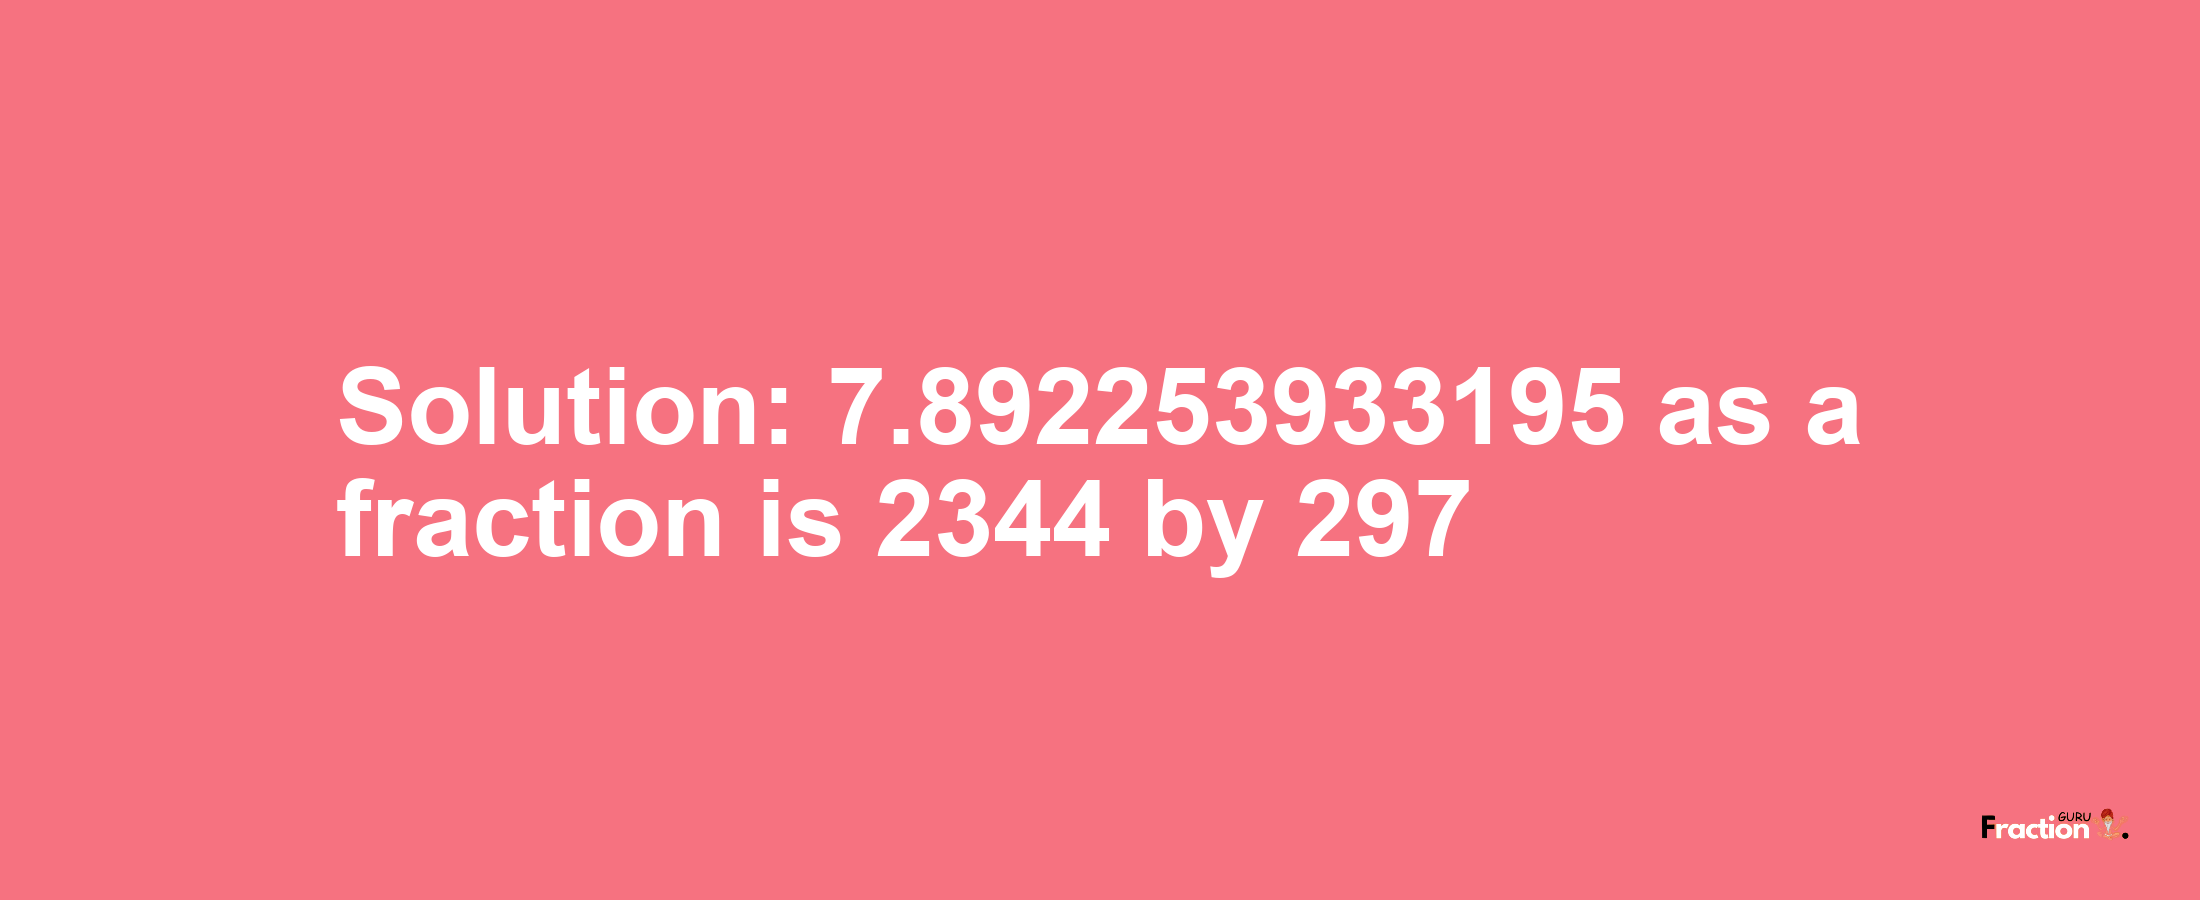 Solution:7.892253933195 as a fraction is 2344/297